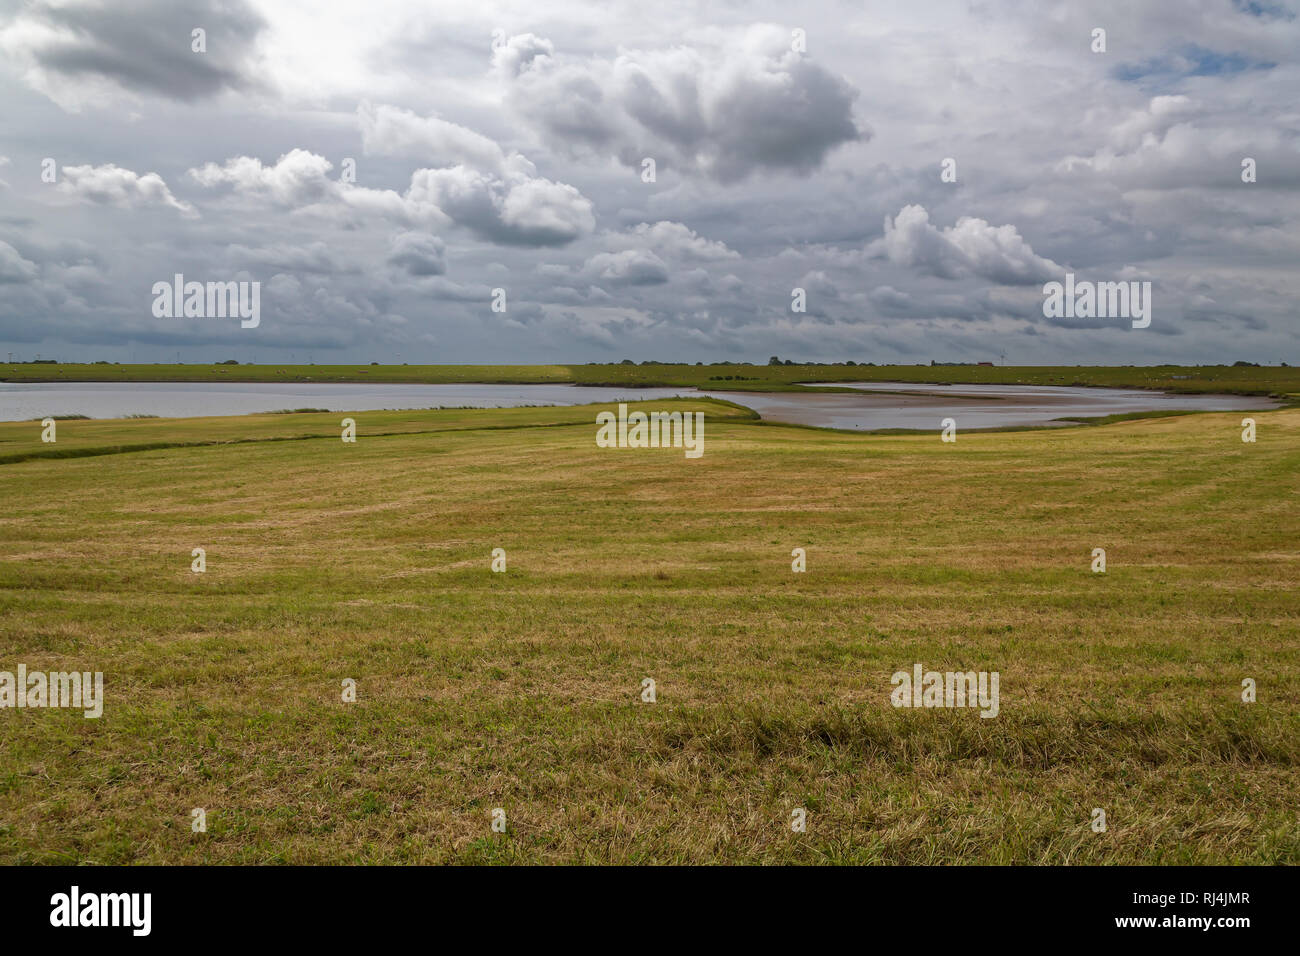 Nationalpark Wattenmeer High Resolution Stock Photography and Images - Alamy